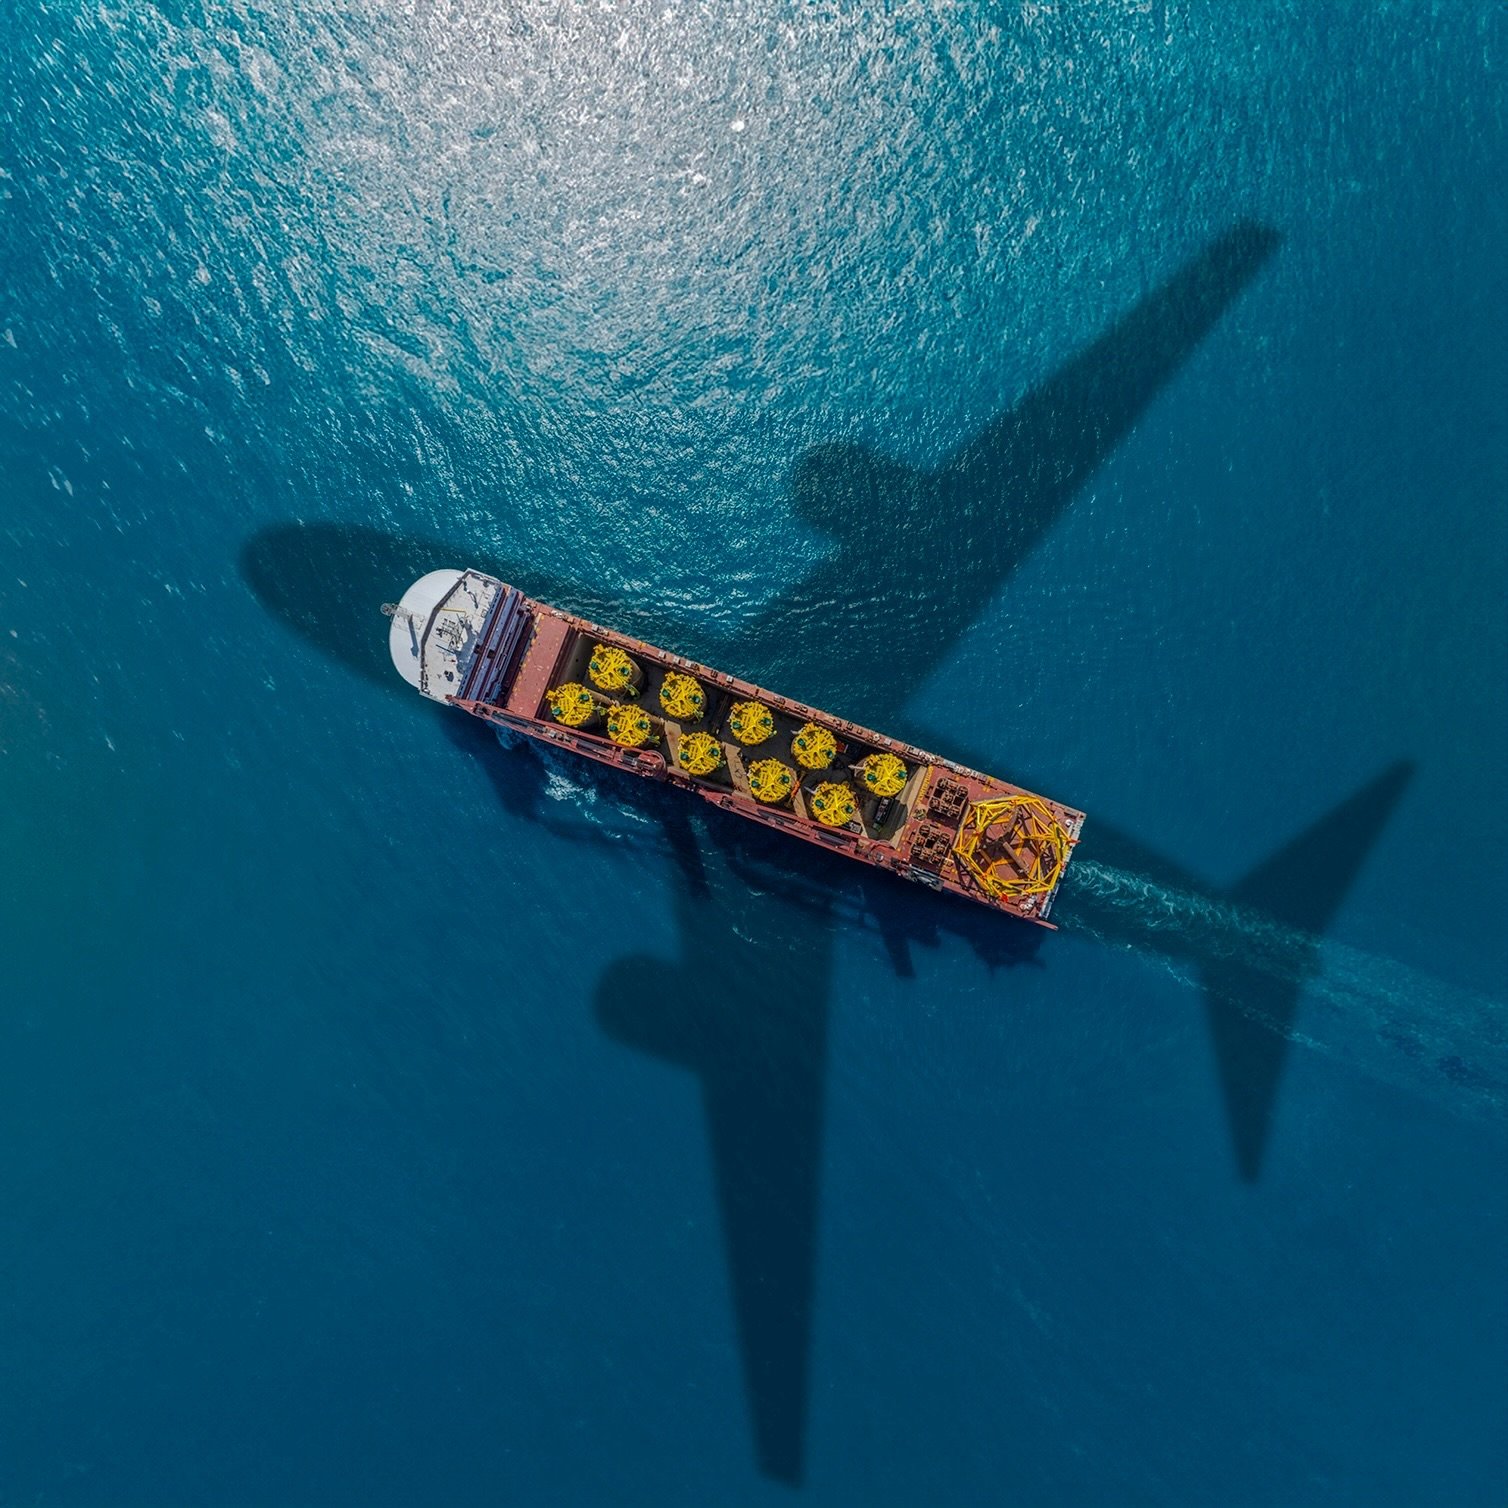 Connecting continents, delivering dreams.
An advertising project by Flyht Studio

#flyhtstudio 
#vessel 
#advertising 
#photography 
#shipping 
#transportation 
#sea 
#seafarer 
#exploretheworld 
#cargo 
#travelphotography 
#freight 
#logistics 
#glo